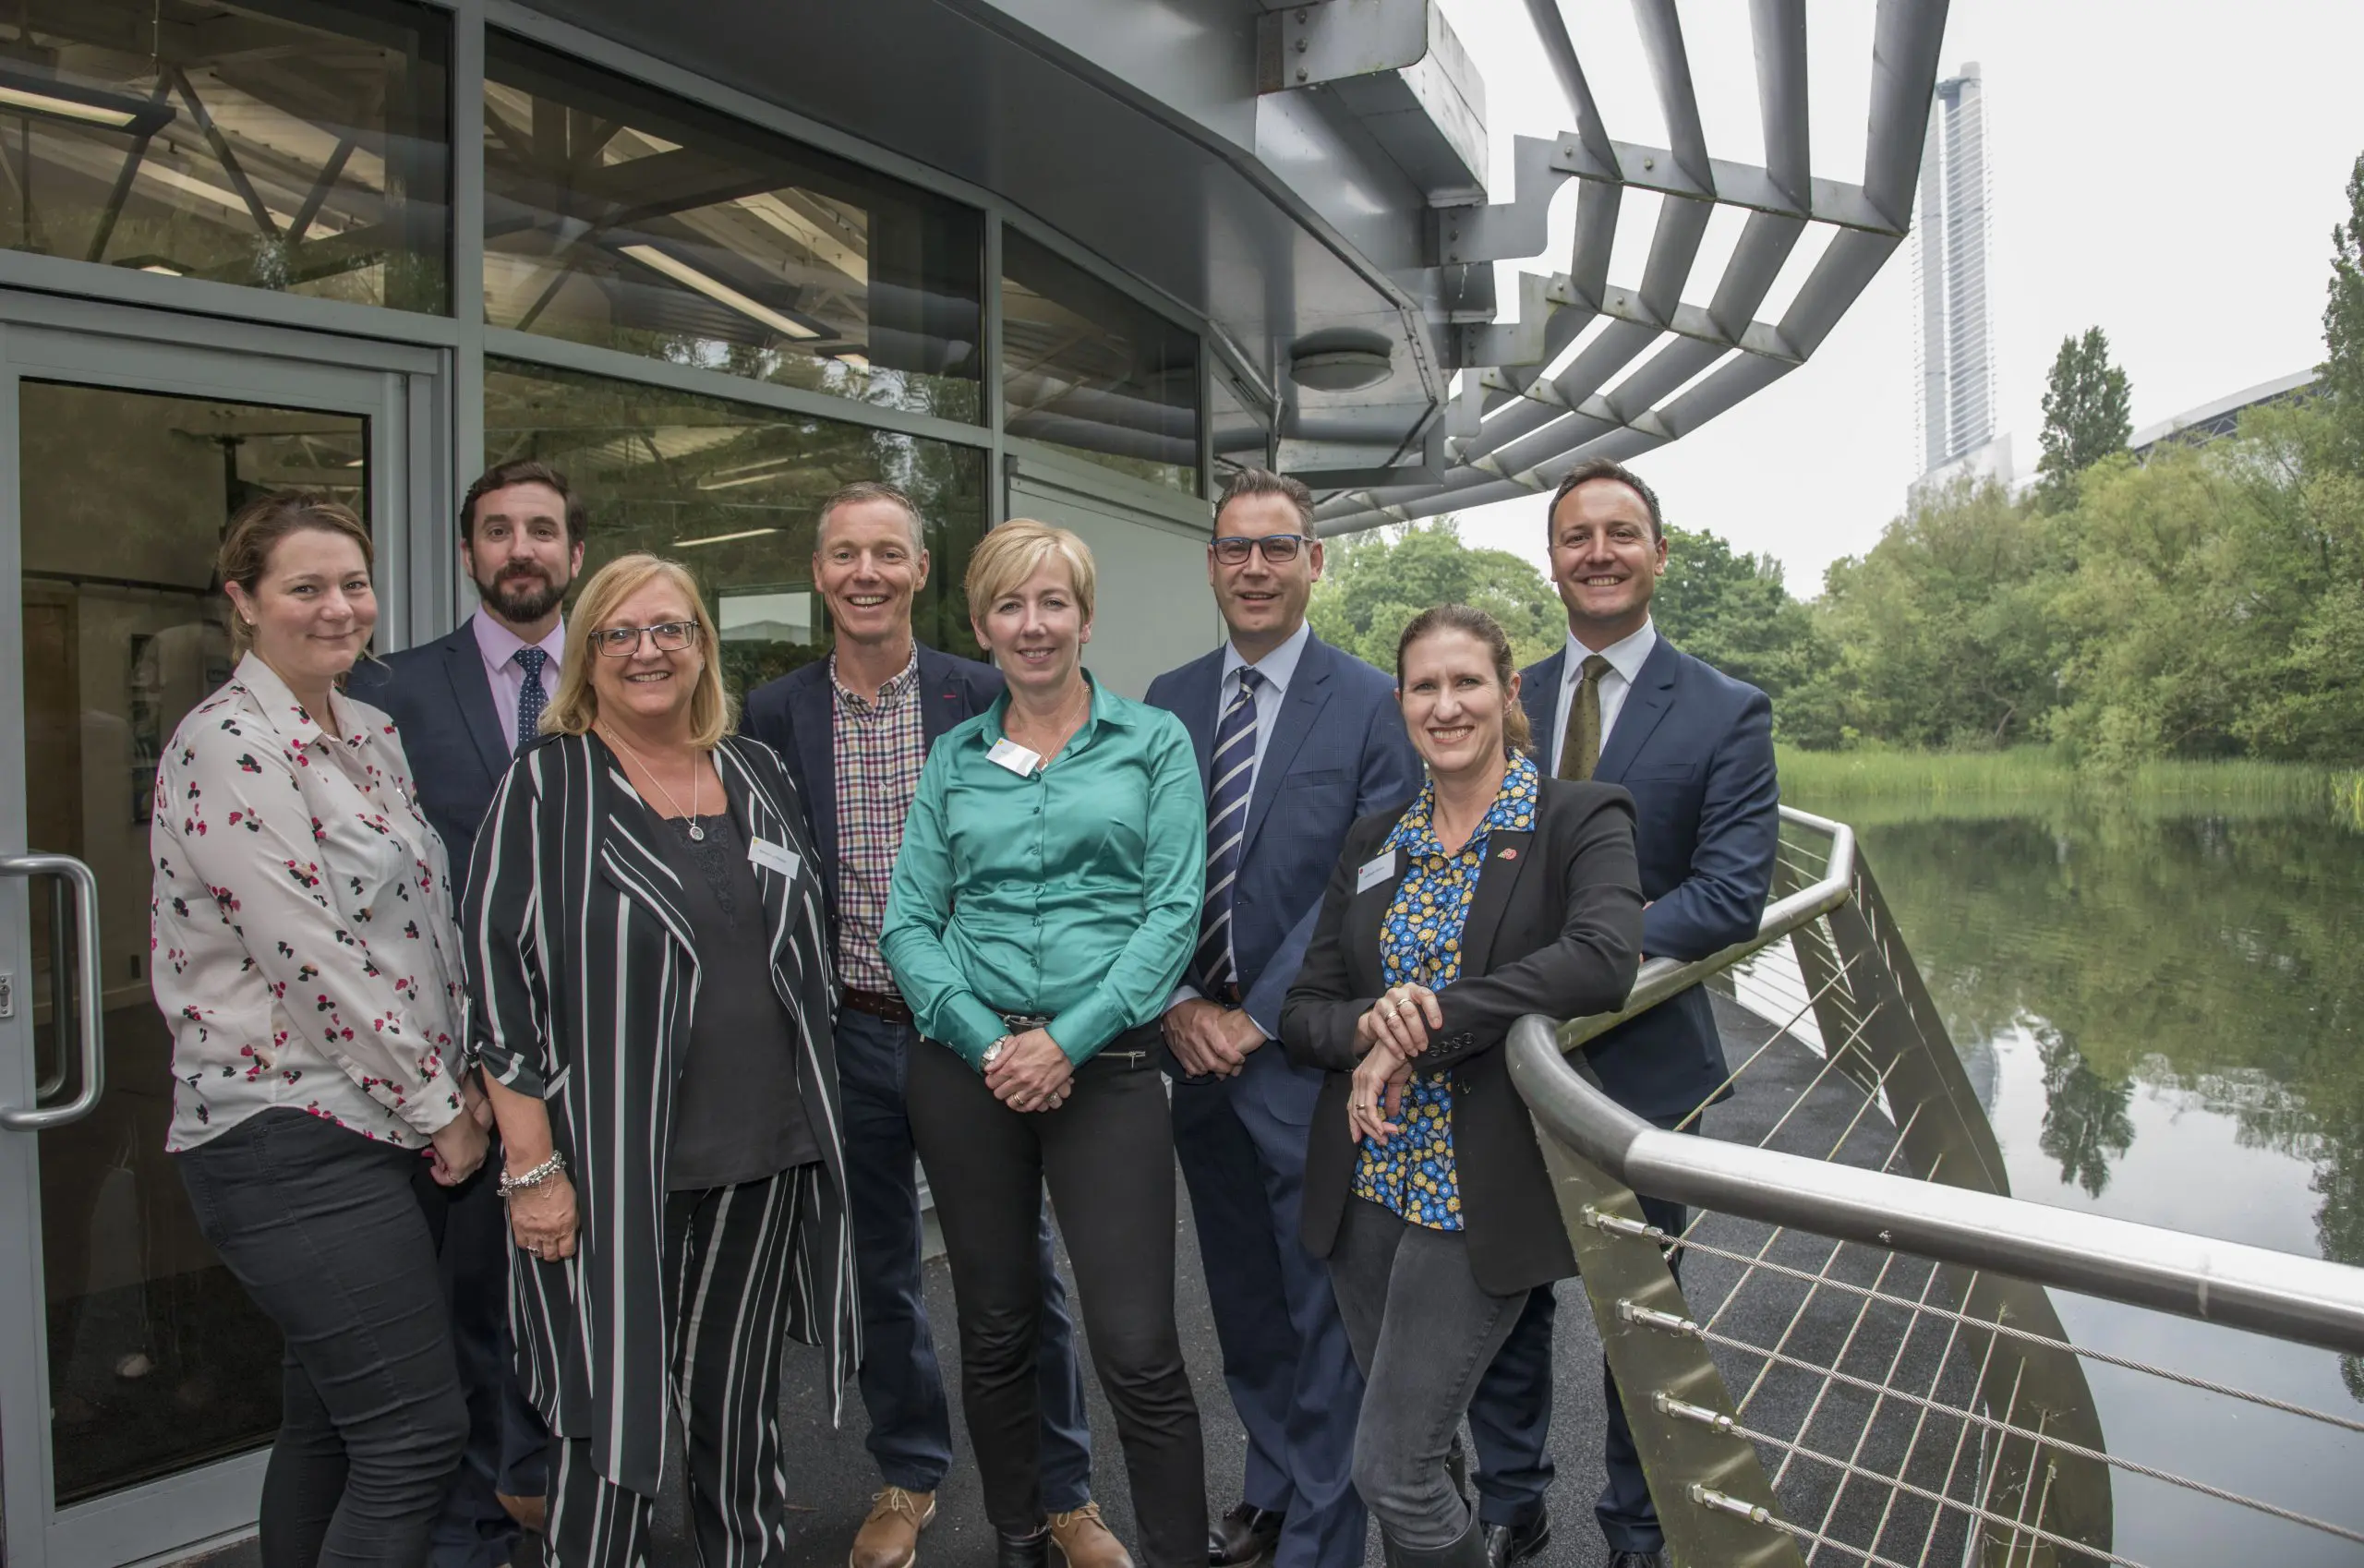 Pictured from left to right are IWFM Home Counties committee members: Hettie Orpin, Adam Phillips, Beverley Mason, Adrian Powell, Sarah Prentice, Neil Grundon, Bradley Smith and Ashleigh Brown, IWFM Non-Executive Board Deputy Chairman